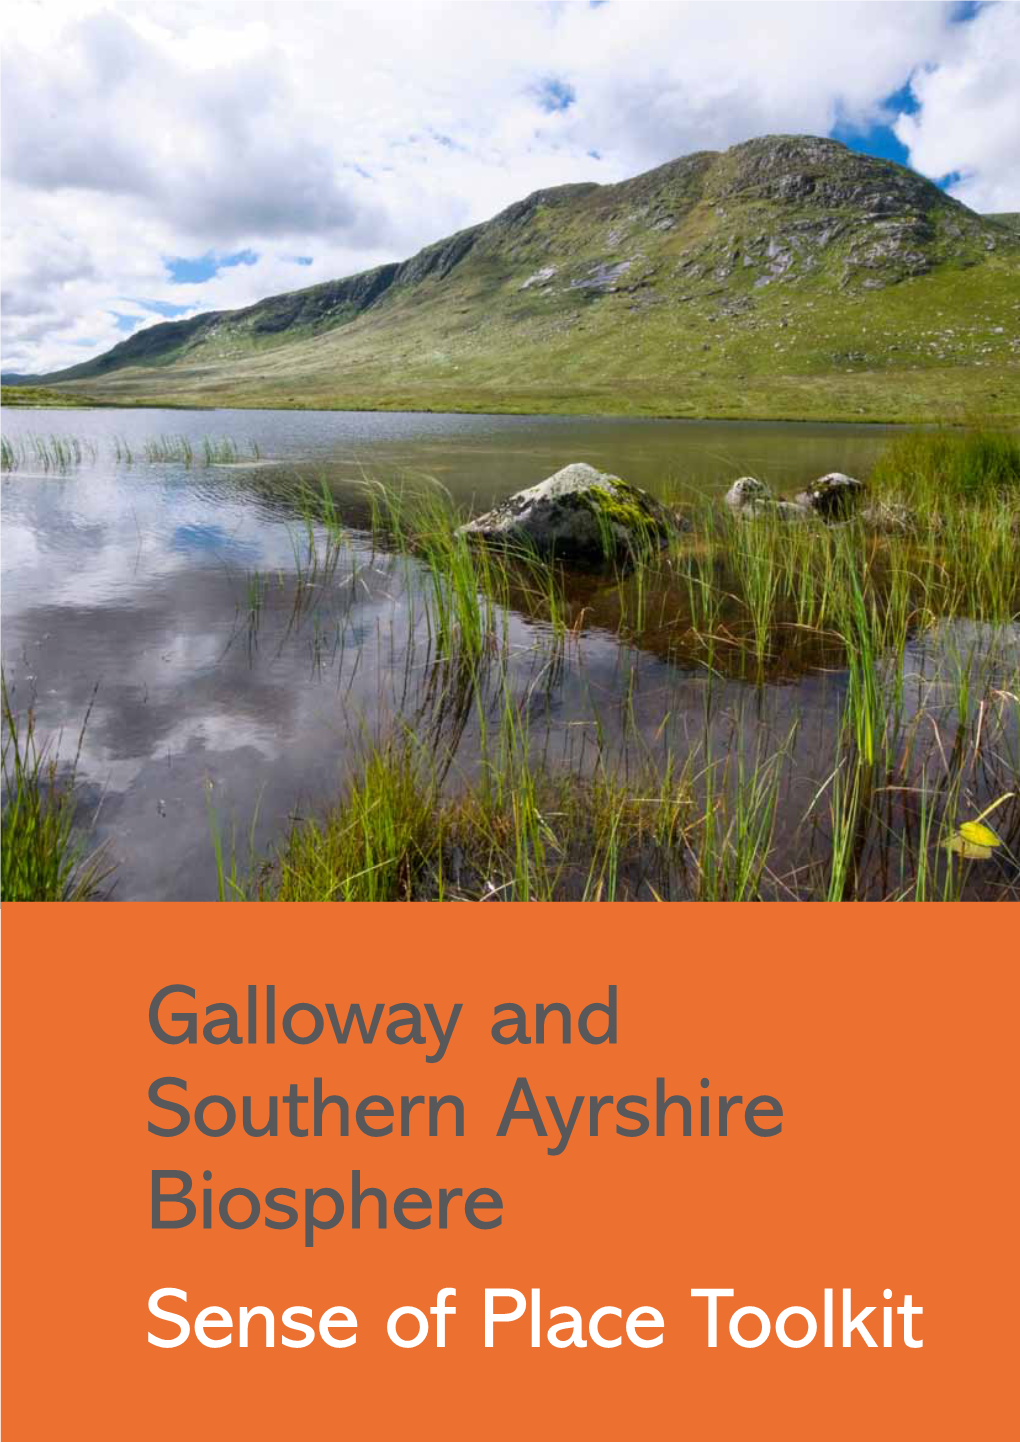 Galloway and Southern Ayrshire Biosphere Sense of Place Toolkit Contents